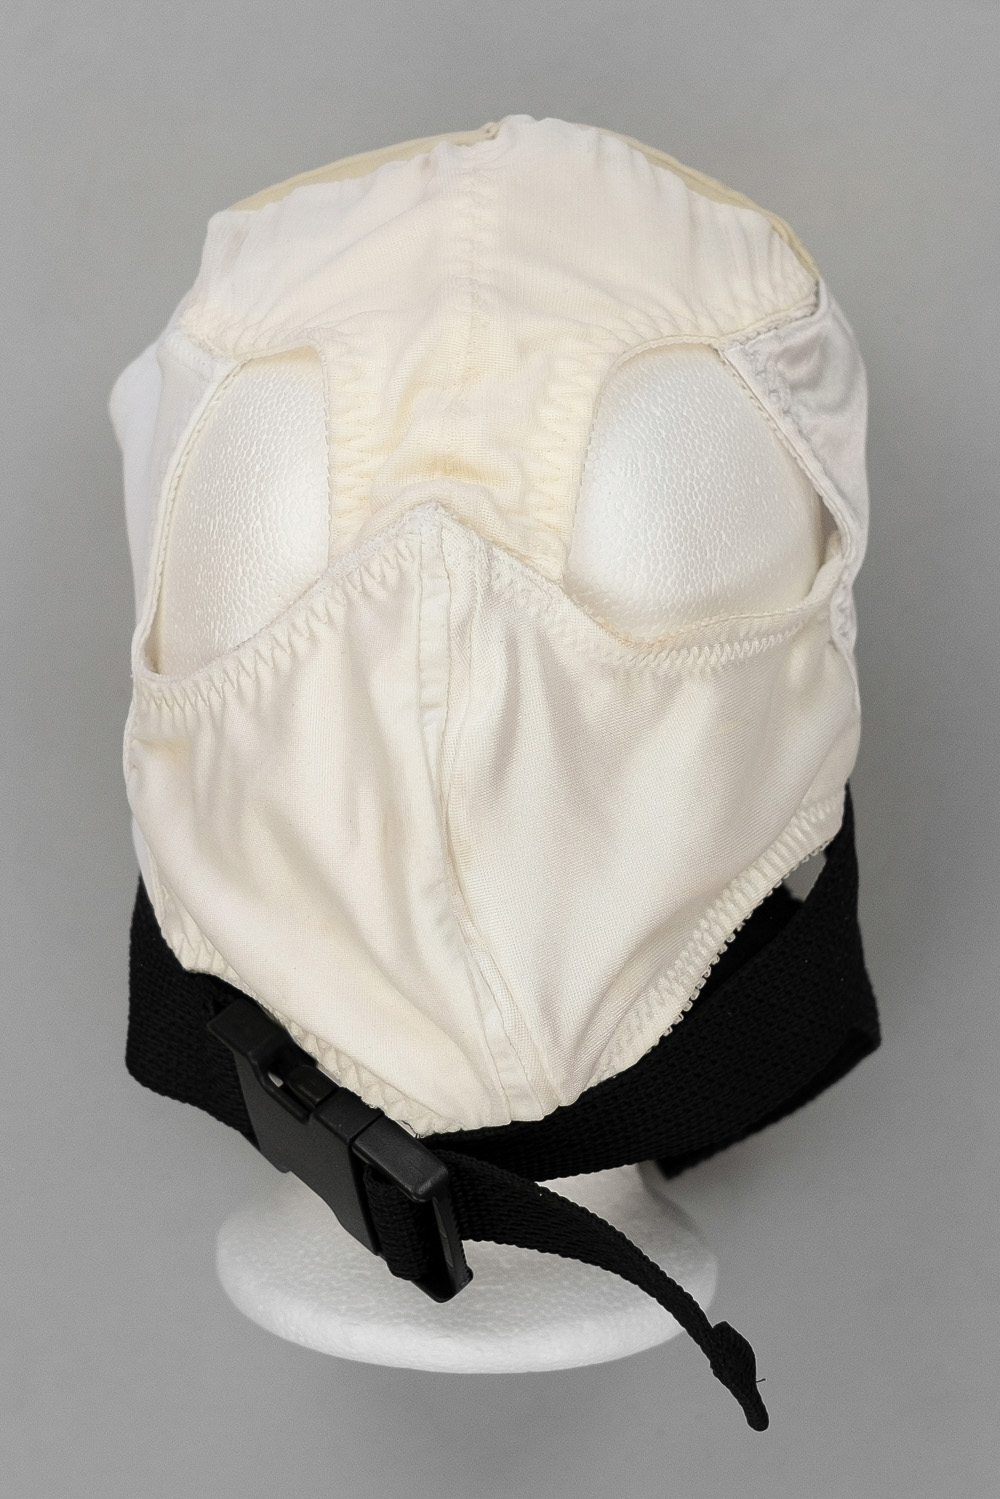 Gusset Mask in Black and White 15